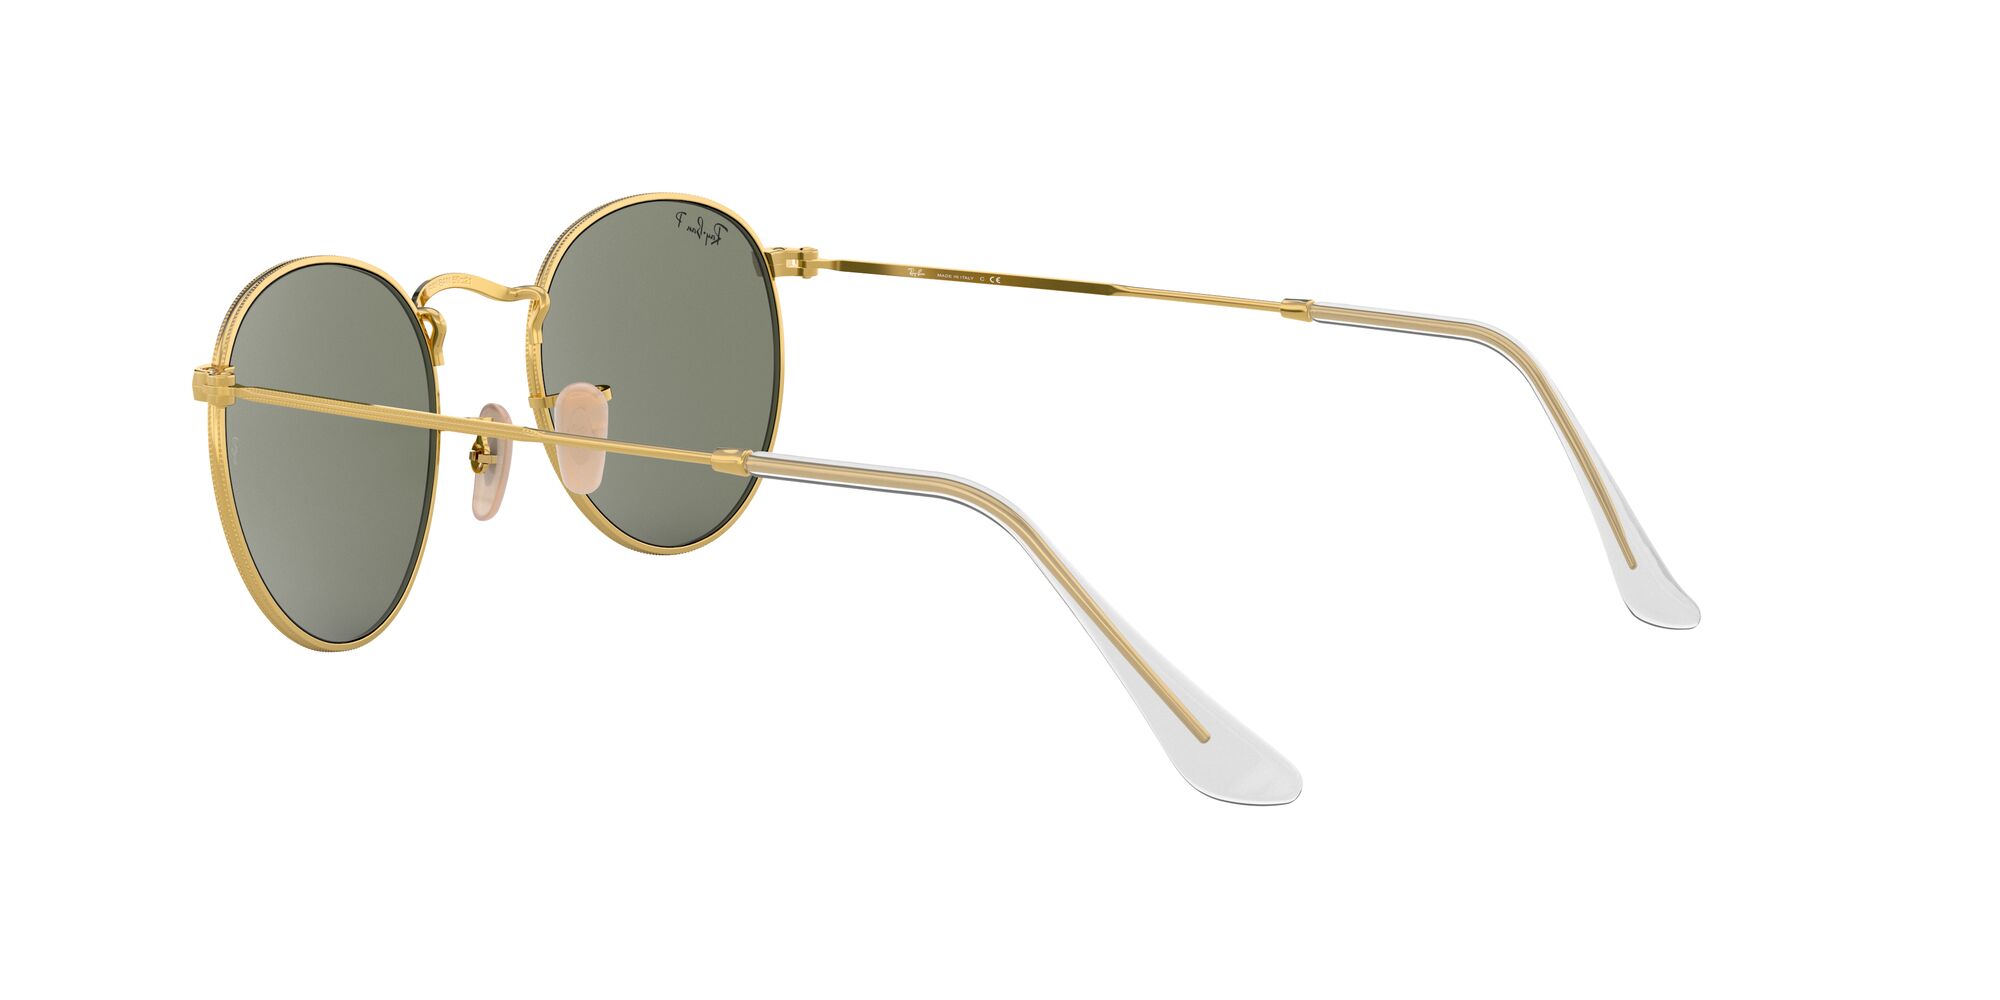 Ray-Ban RB3447 Round Metal Sunglasses - image 5 of 12